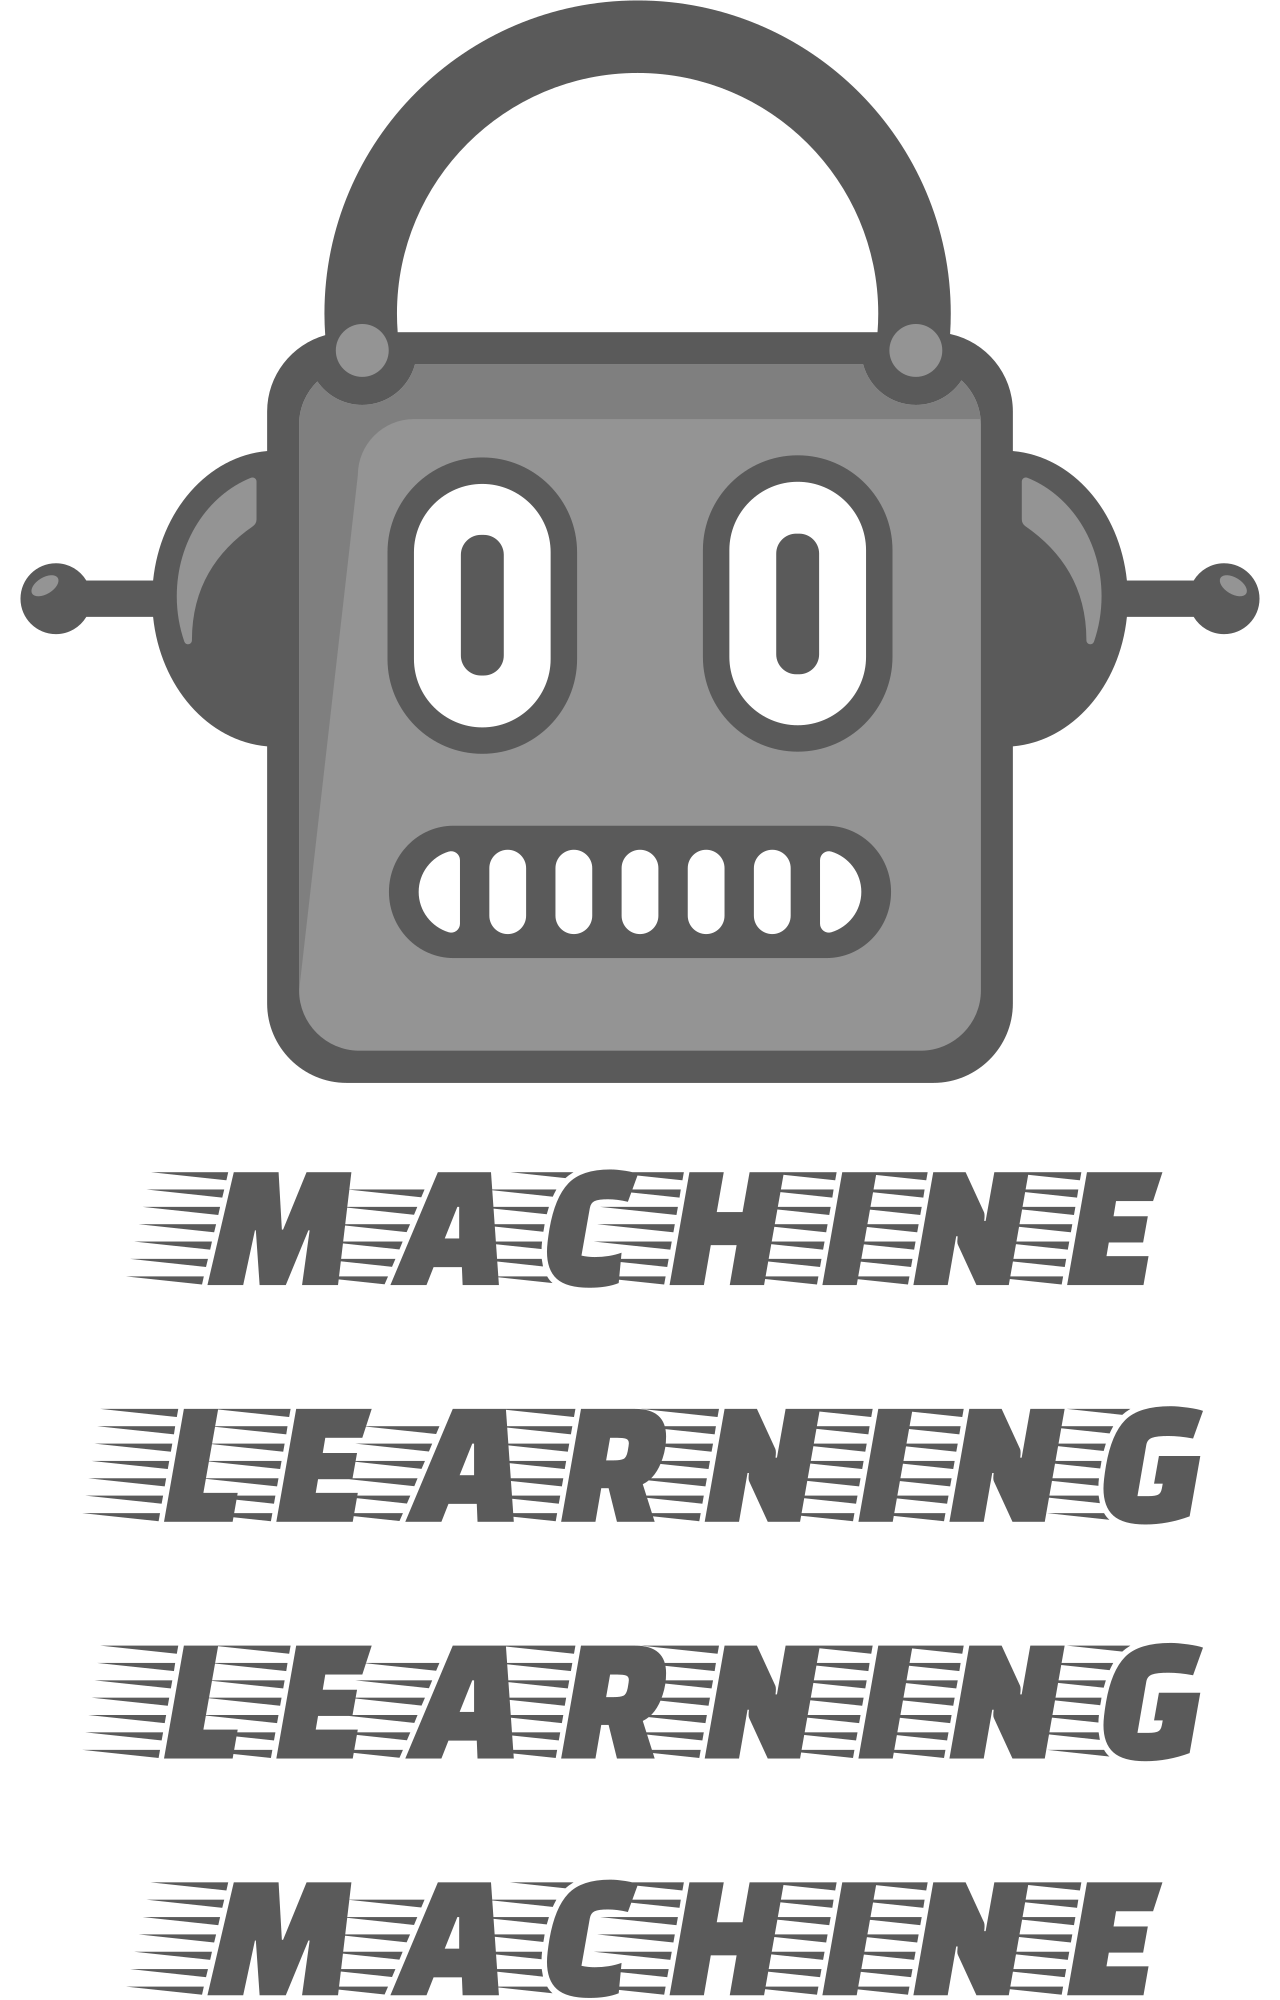 MACHINE
LEARNING
LEARNING
MACHINE's web page